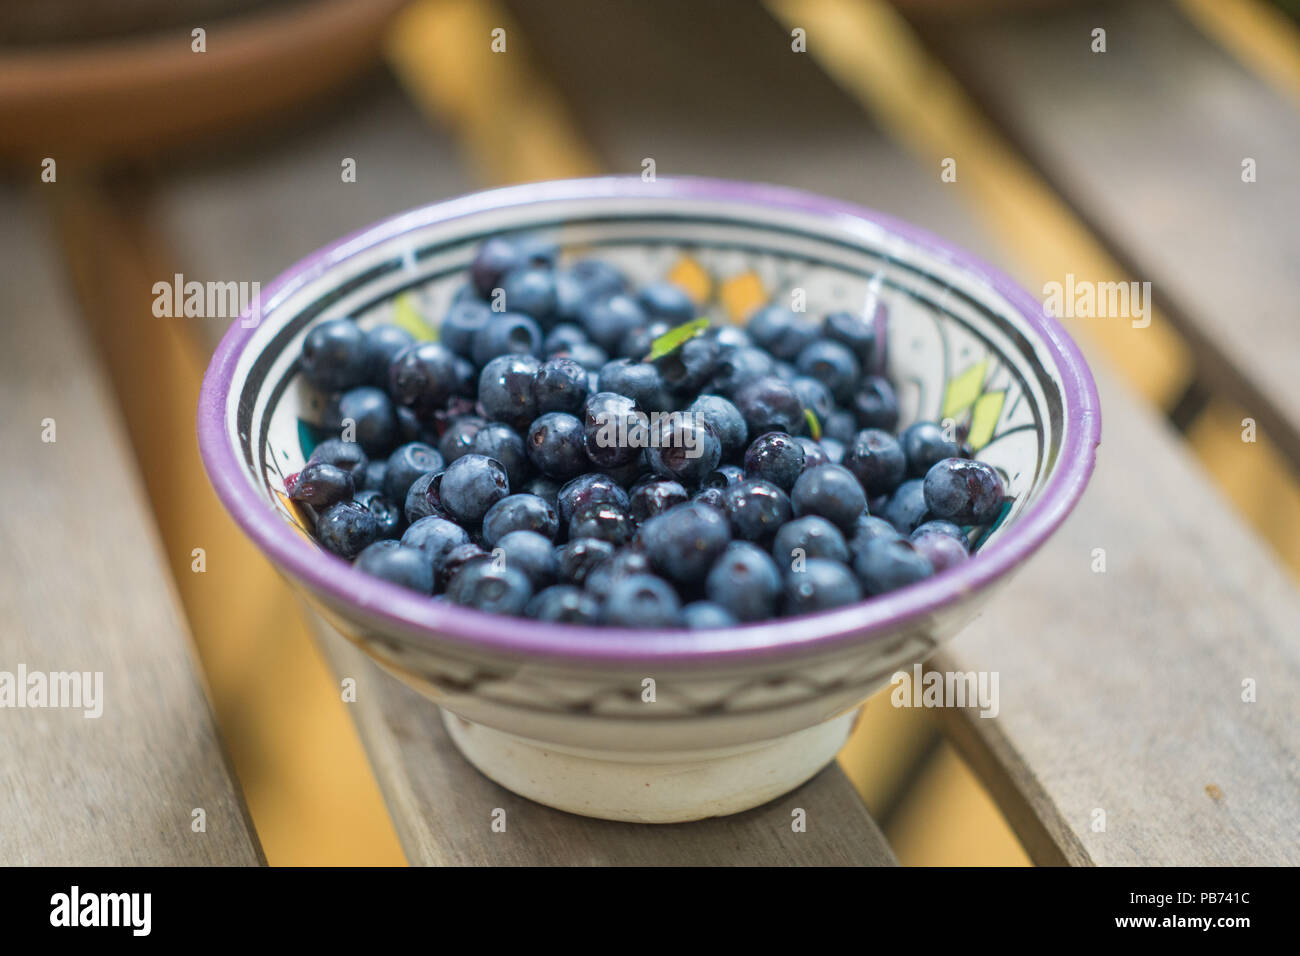 Ripe forest blueberries (bilberry, whortleberry, blaeberry, huckleberry) in a patterned bowl. Close-up Stock Photo